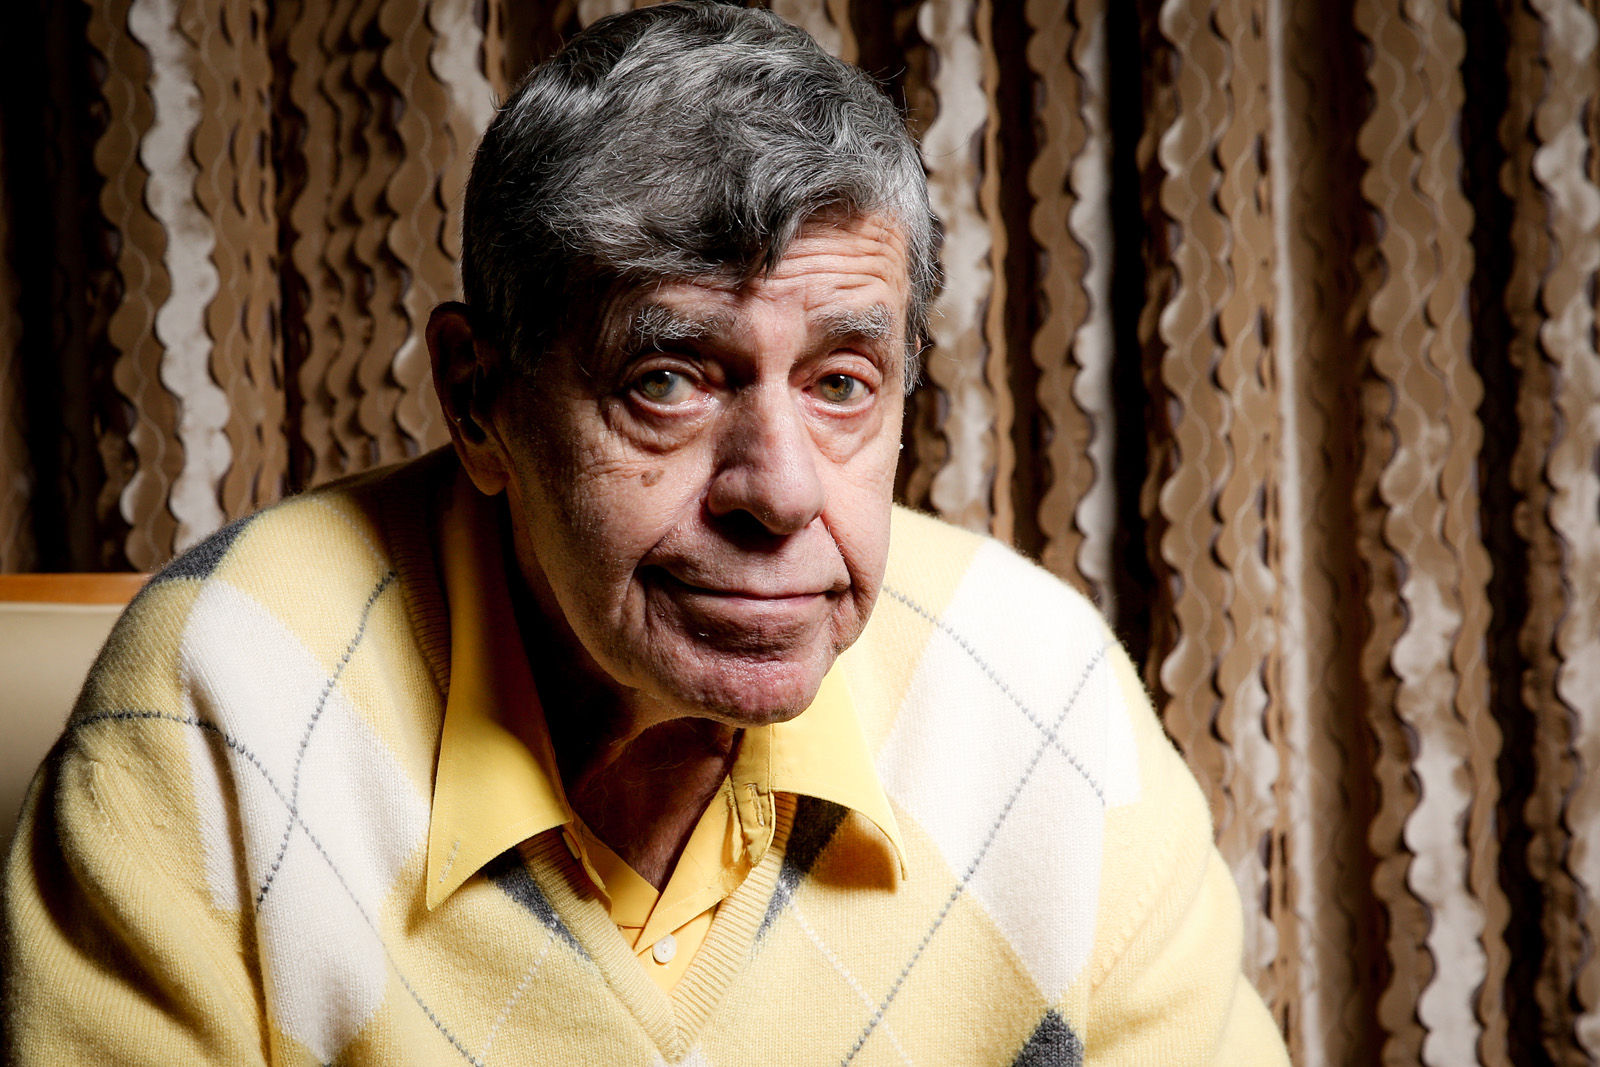 In this Aug. 24, 2016 photo, comedian Jerry Lewis reacts during an interview at the Four Seasons Hotel in Los Angeles. Getting older has been frustrating. At 90, Lewis sometimes loses his train of thought and uses a cane and a wheelchair to get around. But his desire to connect with audiences, and with people, is undiminished. (Photo by Rich Fury/Invision/AP)